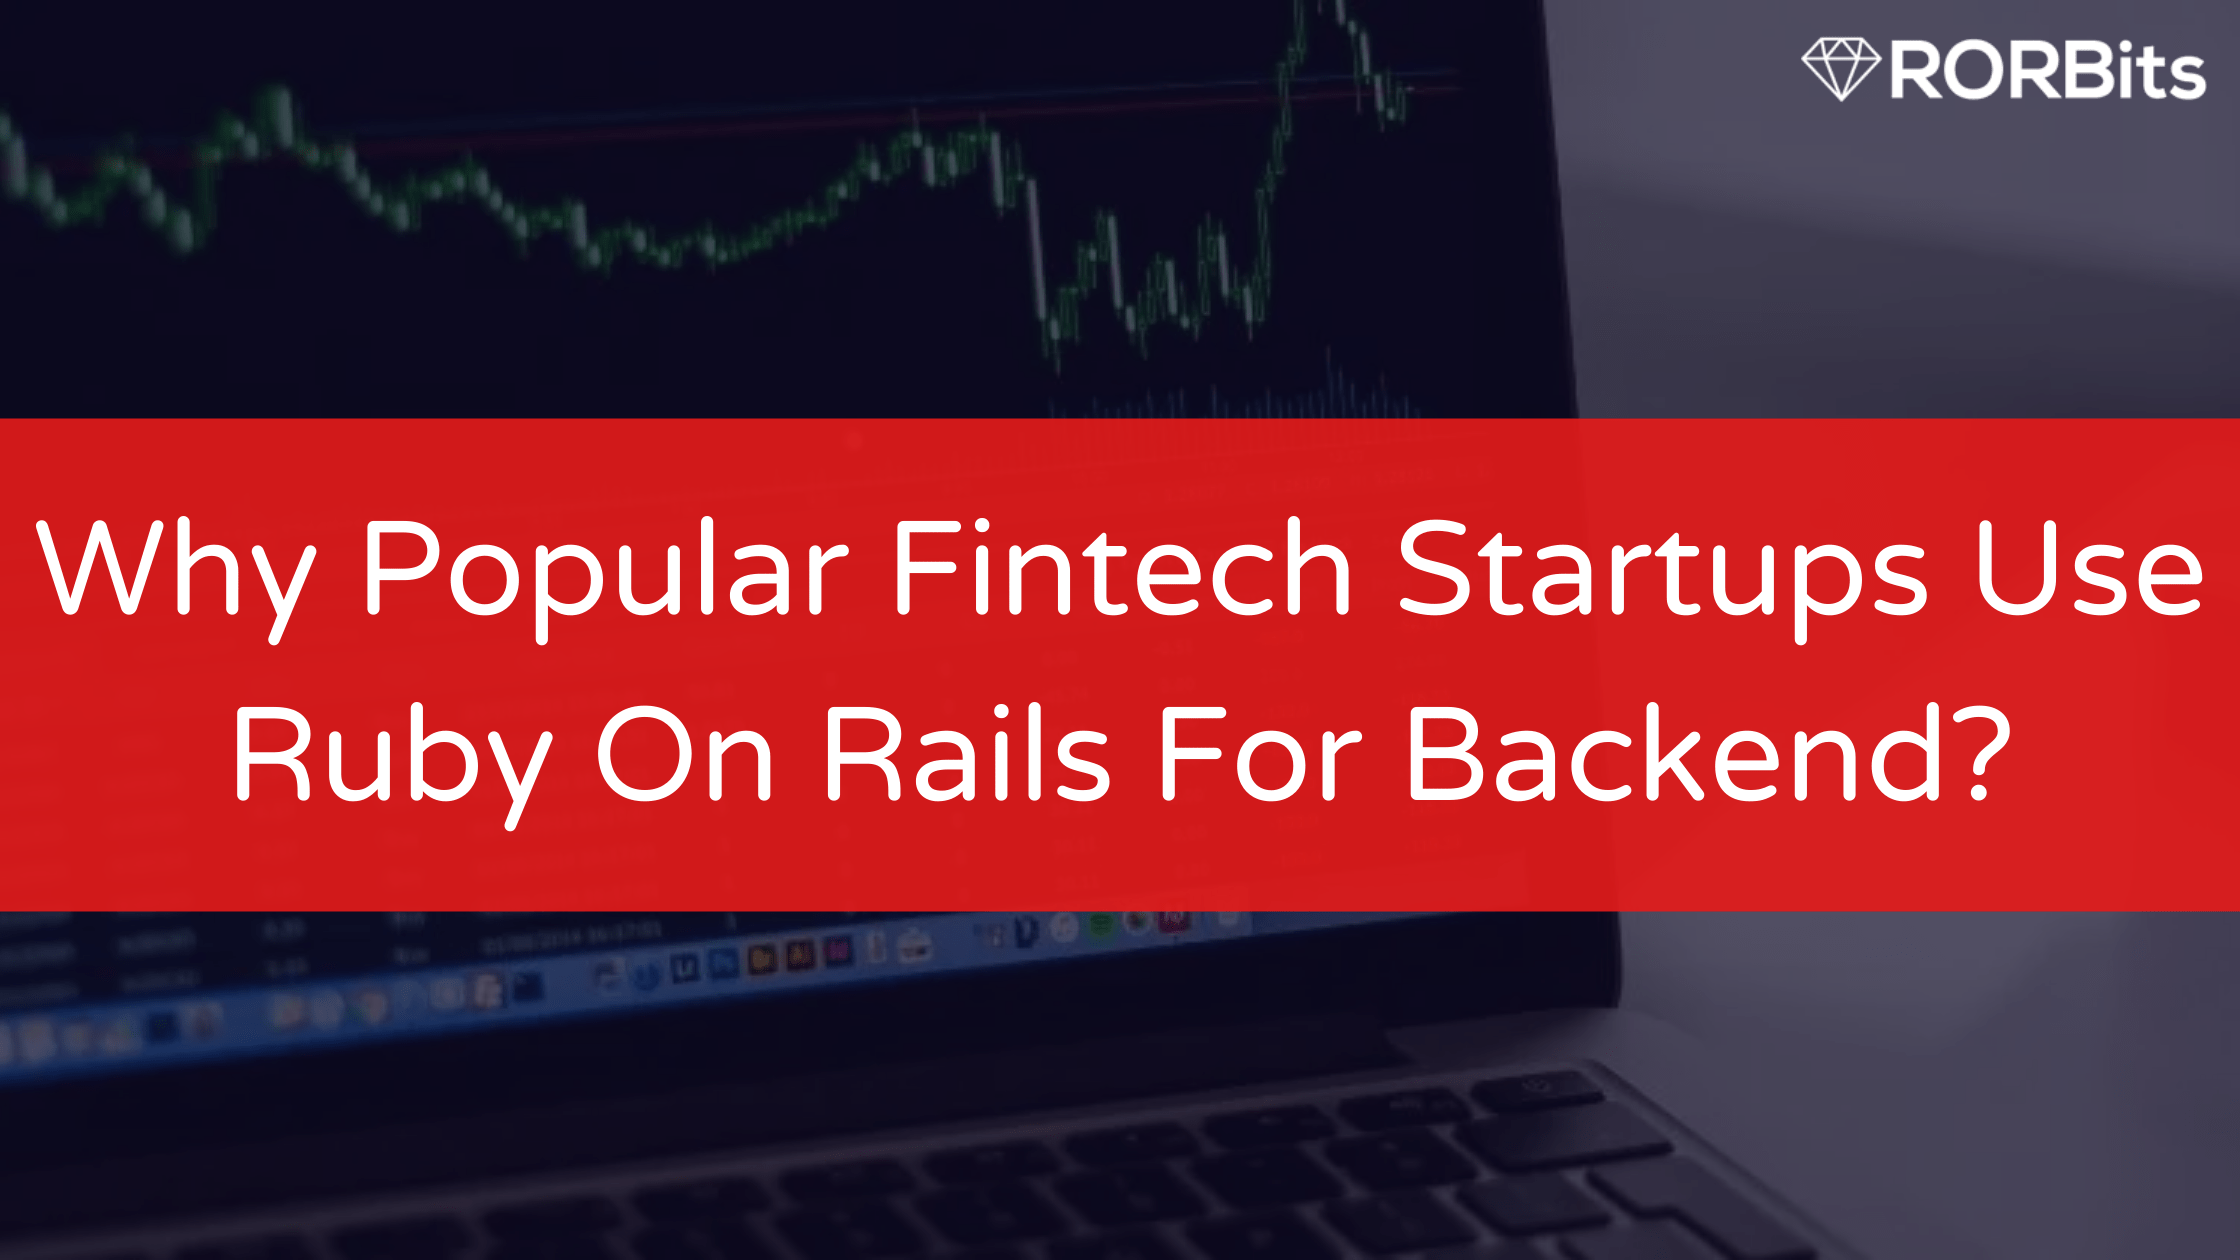 Why Popular Fintech Startups Use Ruby On Rails For Backend?